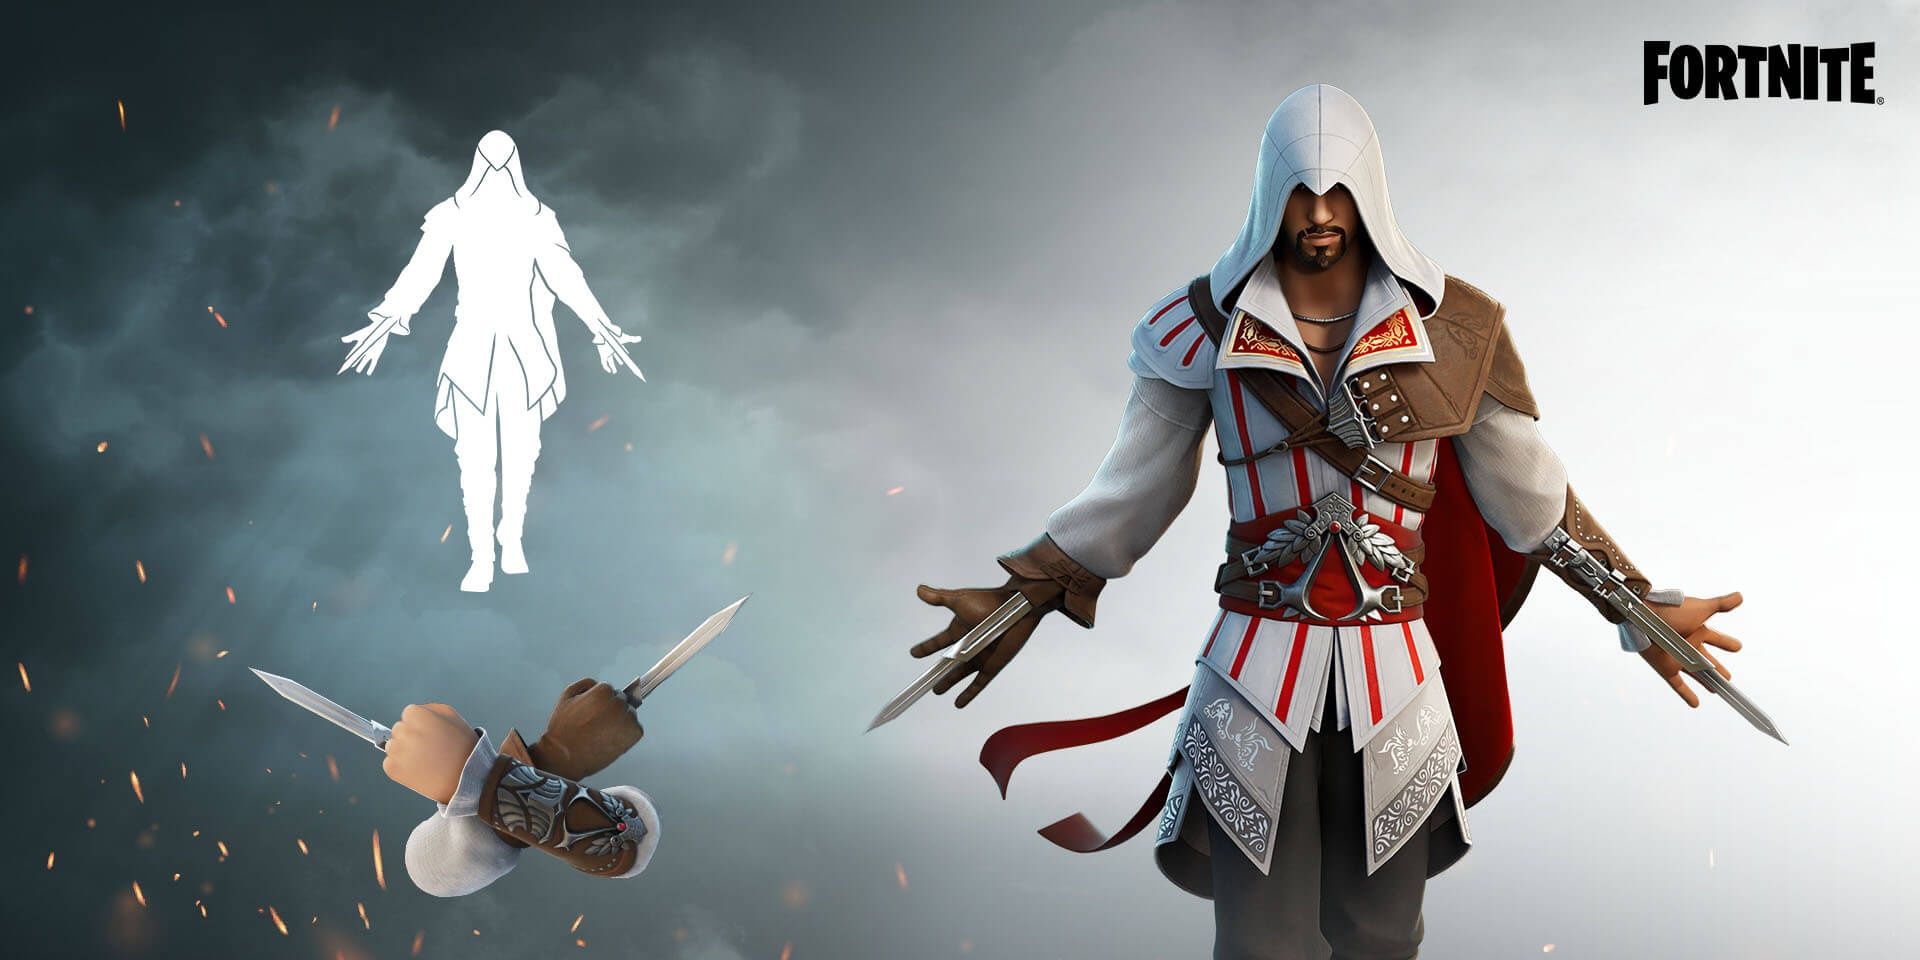 ezio auditore from assassin's creed in fortnite